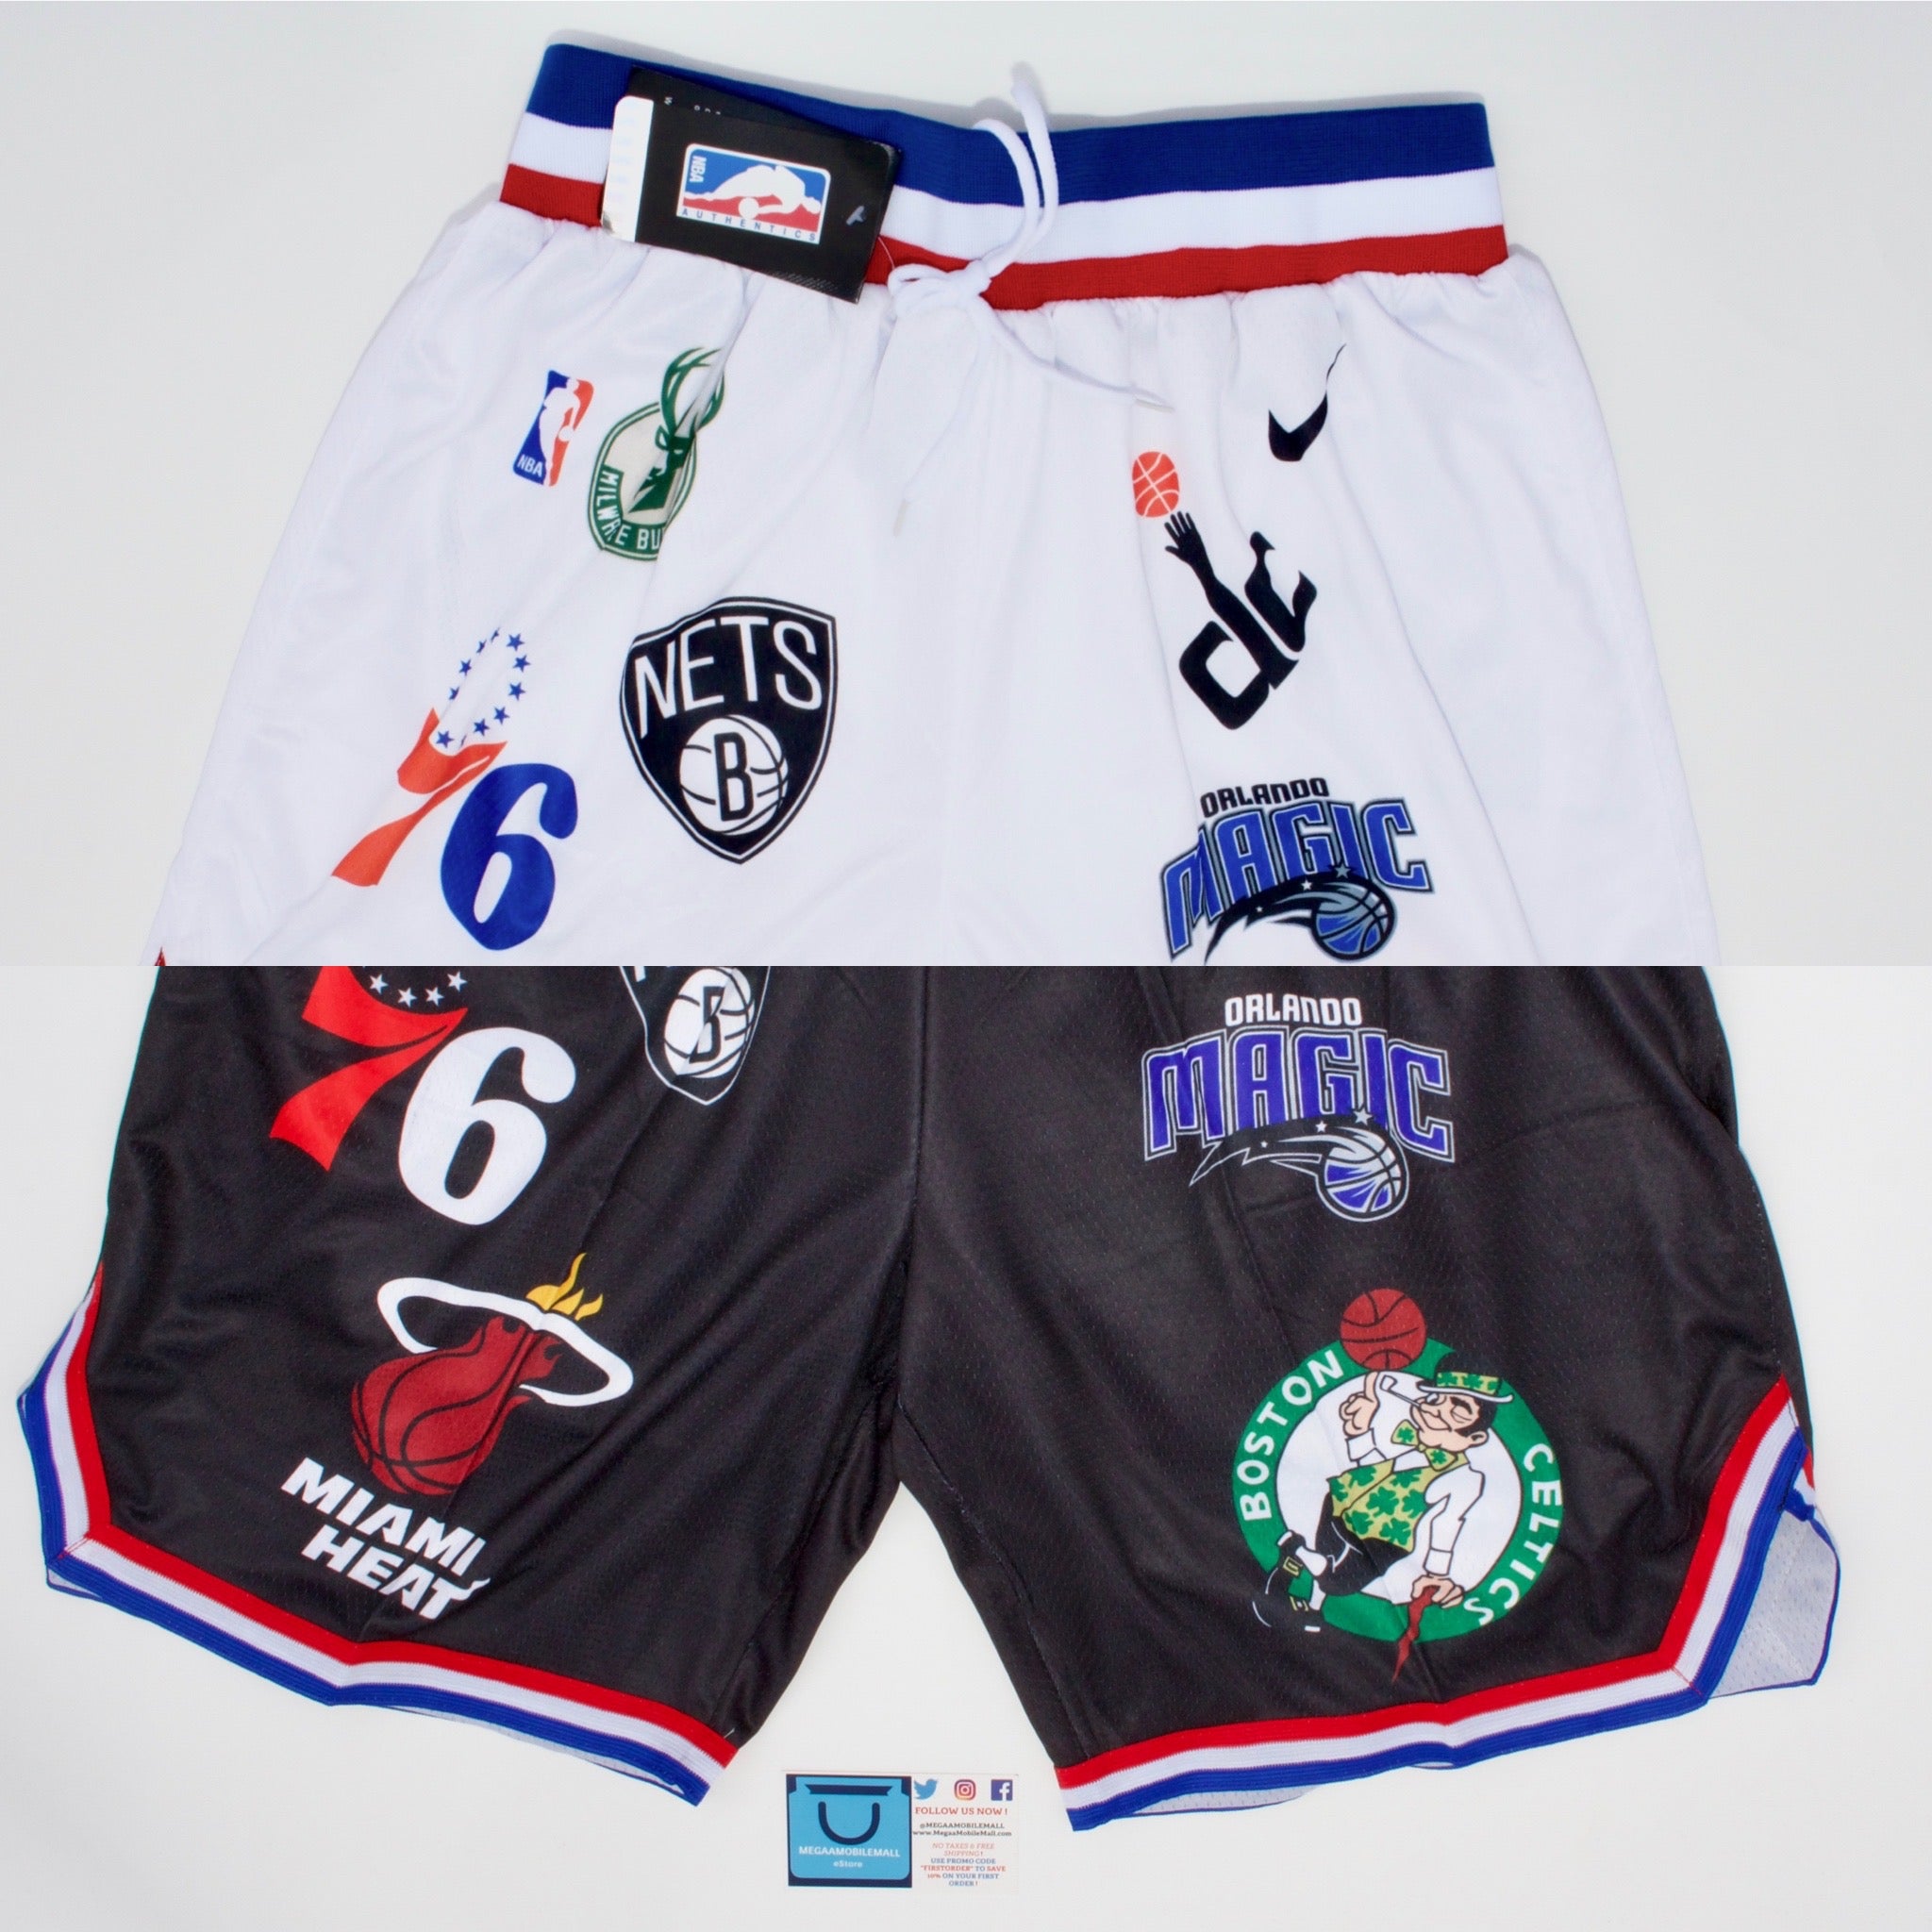 MEGAAMOBILEMALL ™️ on X: We have NBA VINTAGE BASKETBALL SHORTS 🩳🏀  available on our website 🛒 PROMO CODE : SUMMERSALE to save 20% on your  order today‼️ #megaamobilemall #nba #basketballshorts #nbashort